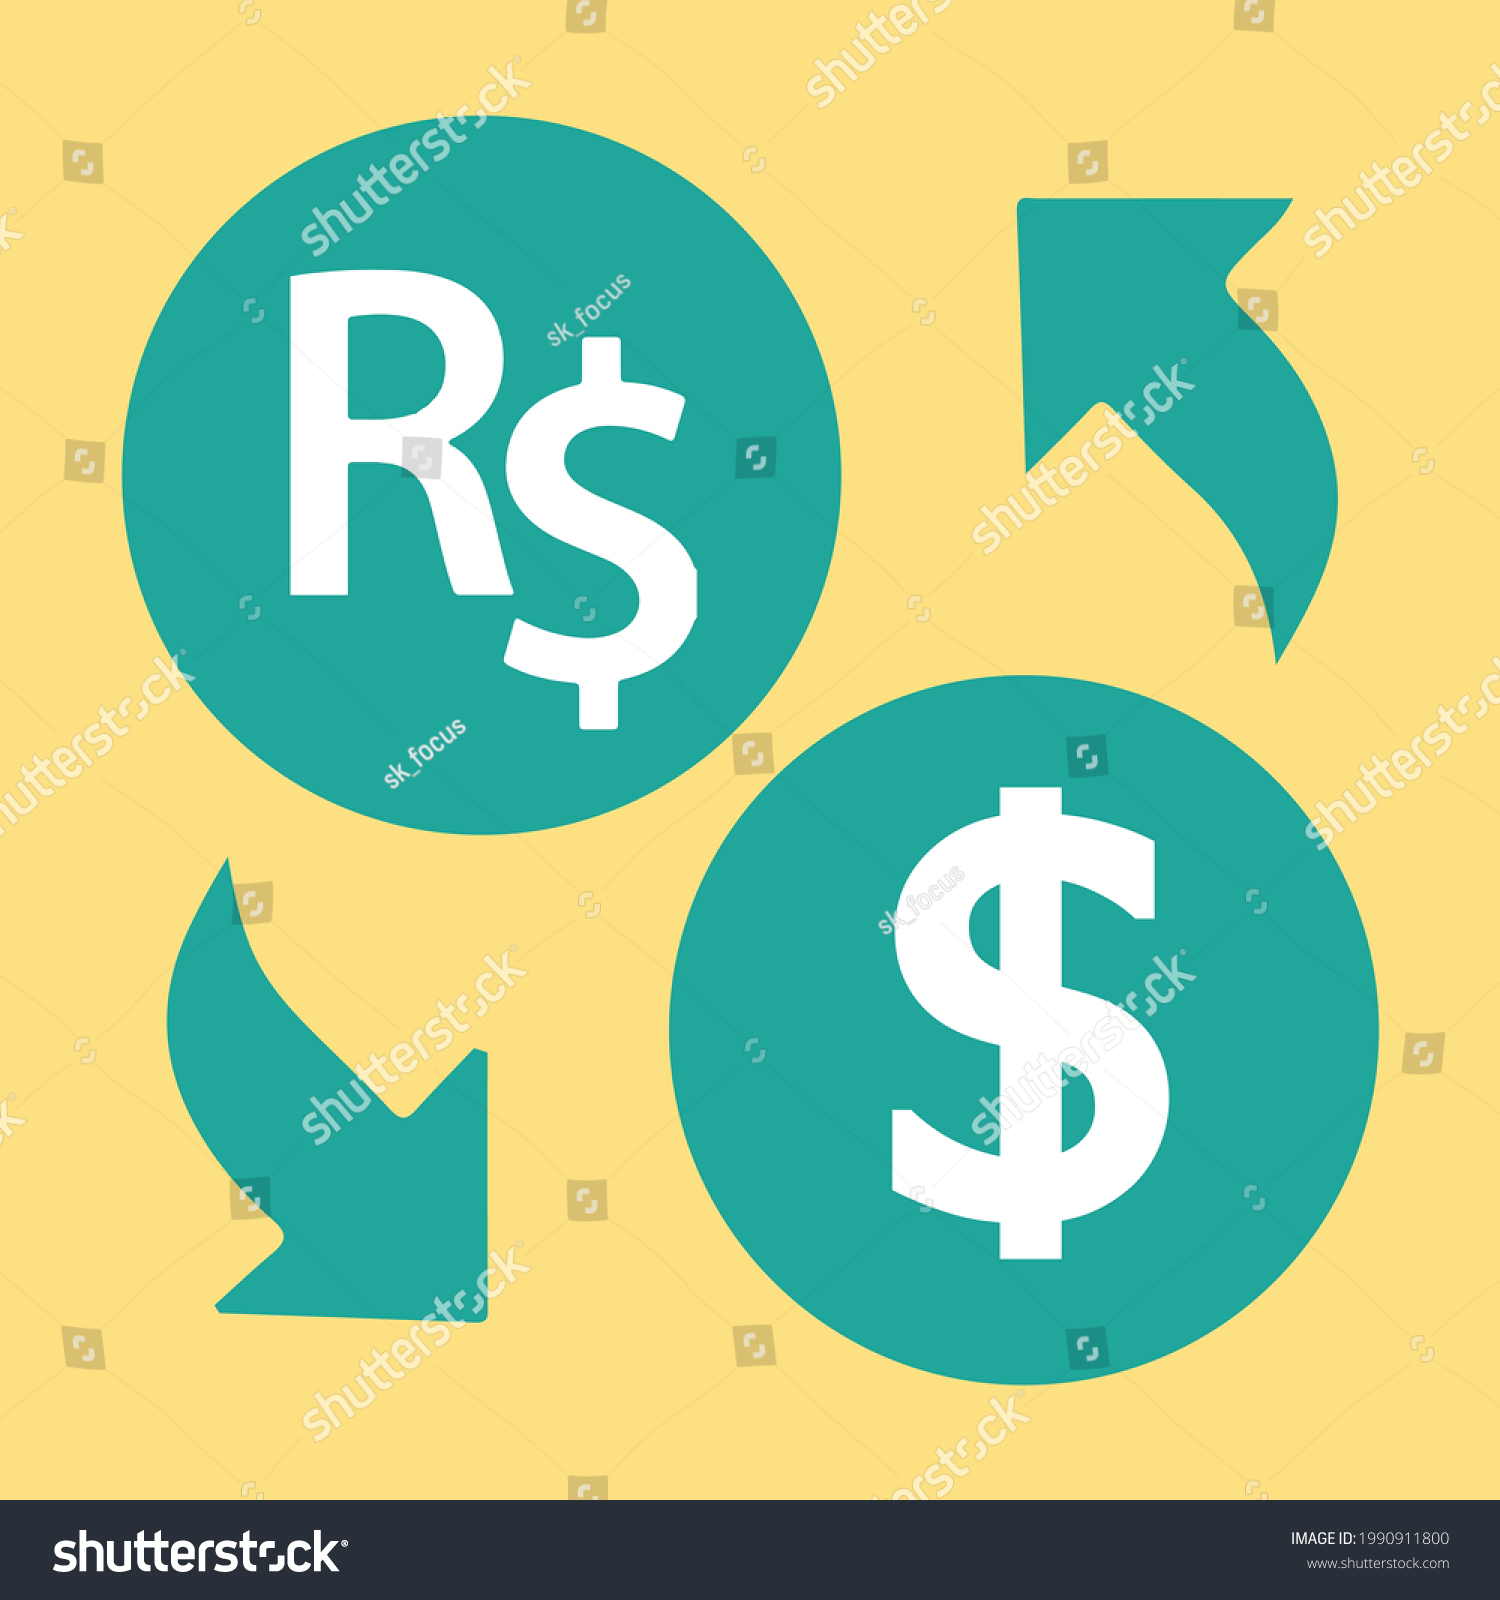 SVG of SK- Brazilian Real BRL Exchange to US Dollar USD vector icon logo illustration design. Can be used for web, mobile, infographic and print. svg